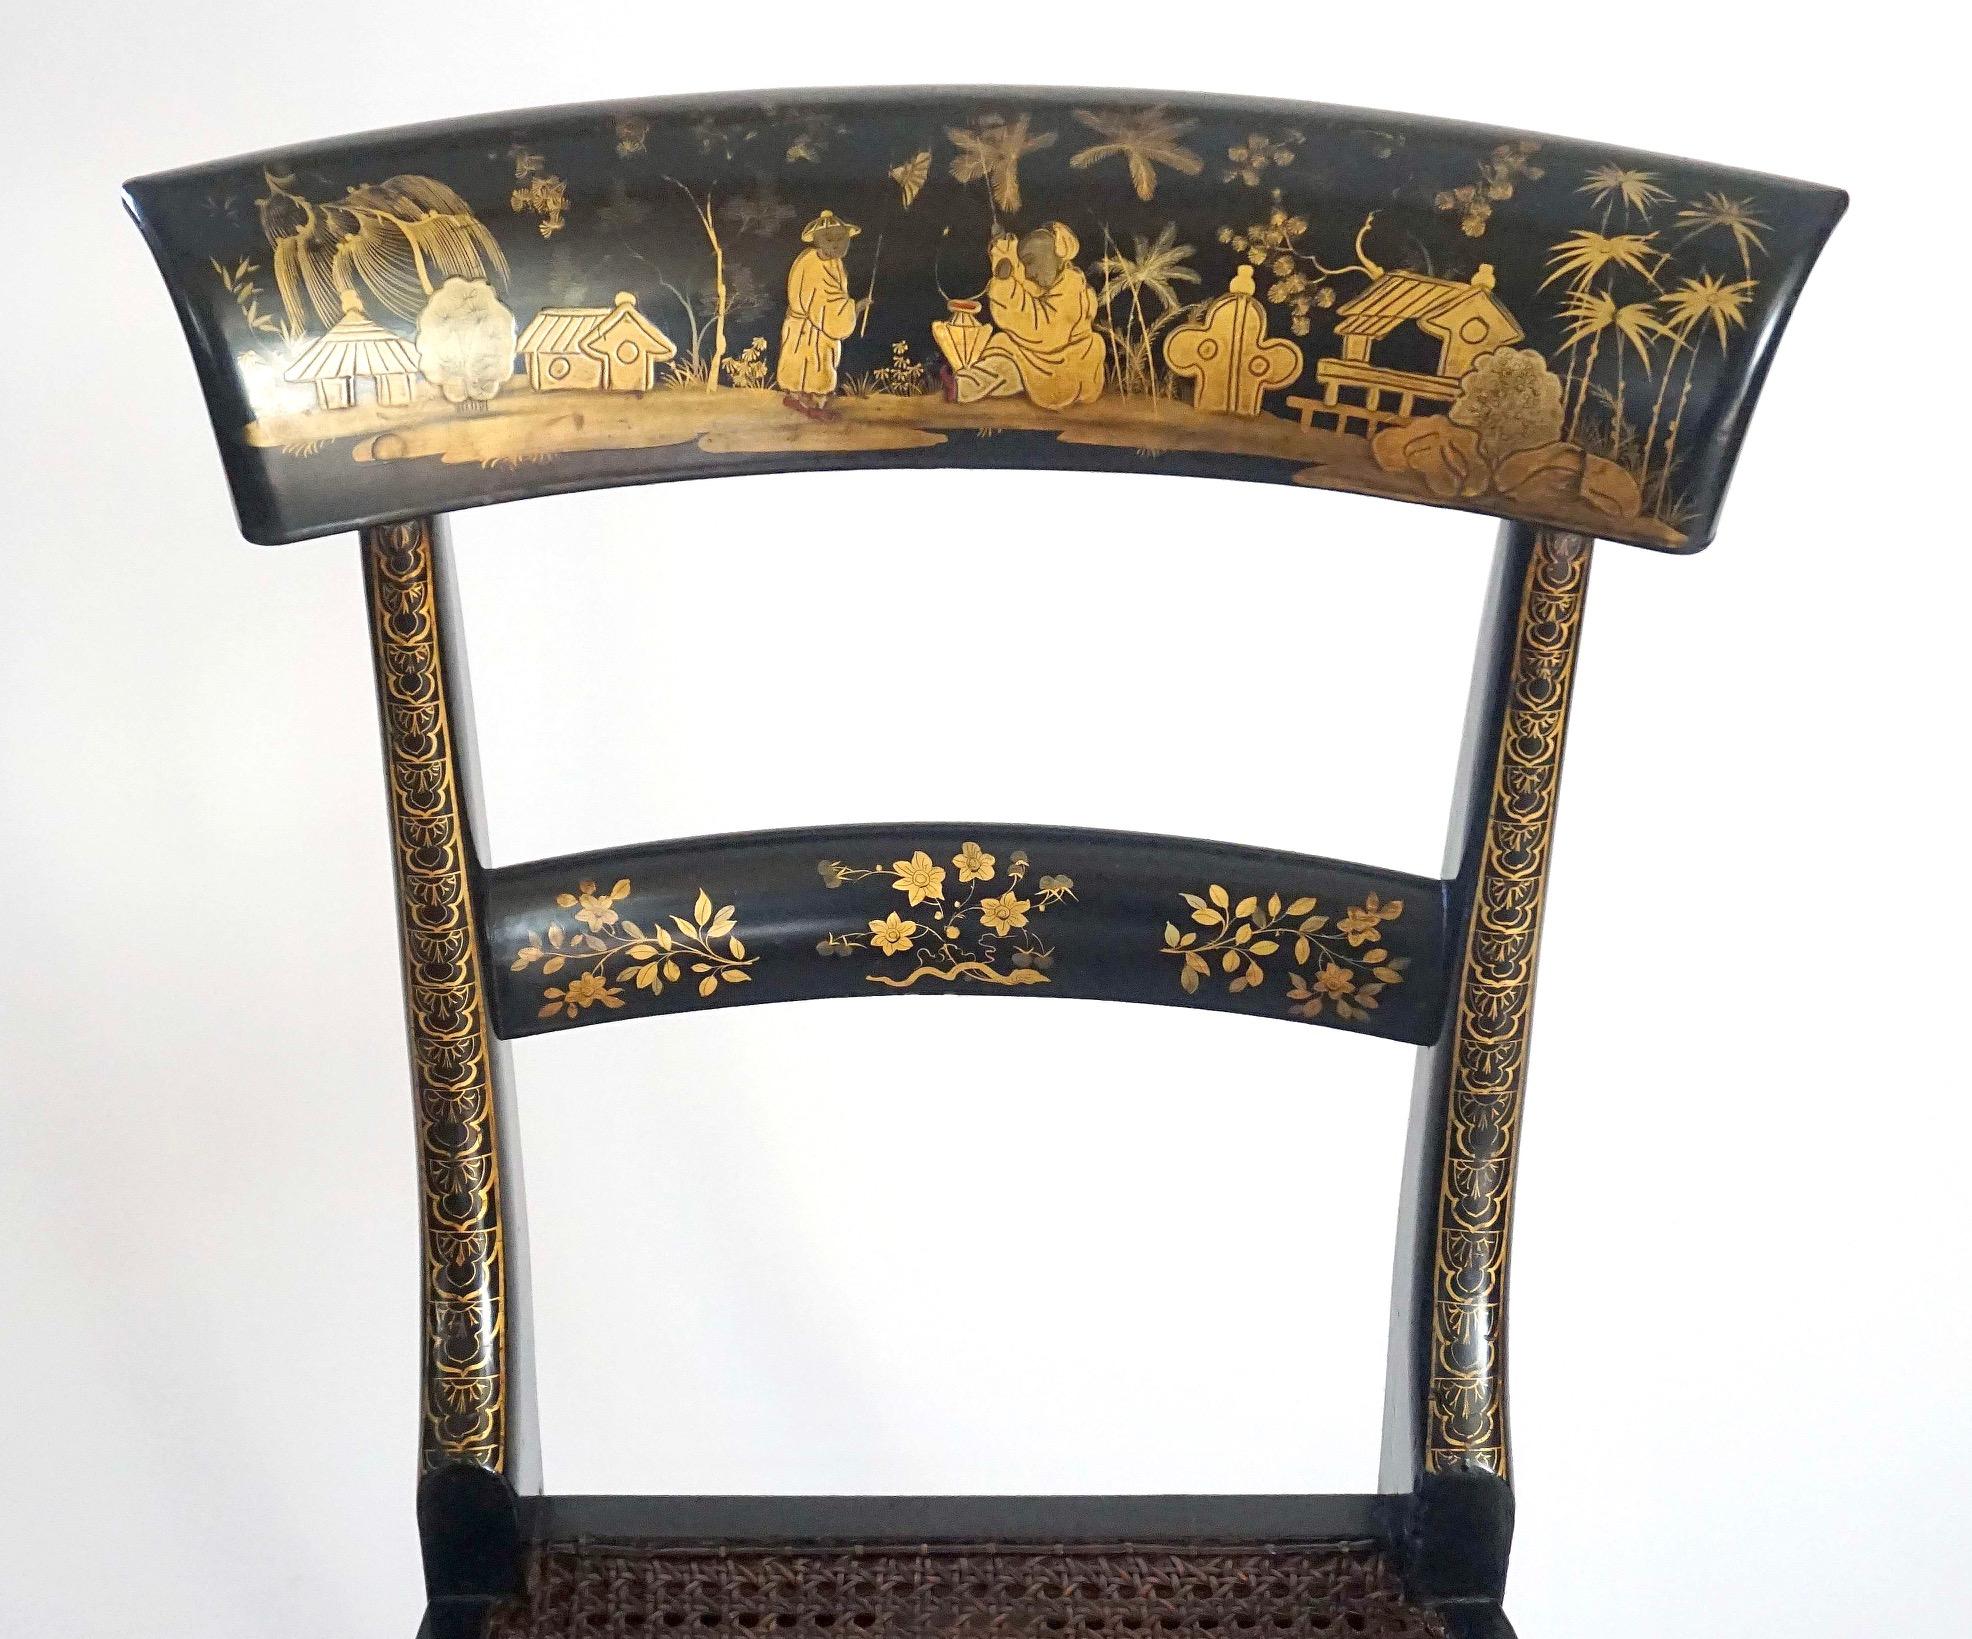 English Chinoiserie Chairs, Ex-Garvan Collection Yale University, circa 1835 For Sale 1